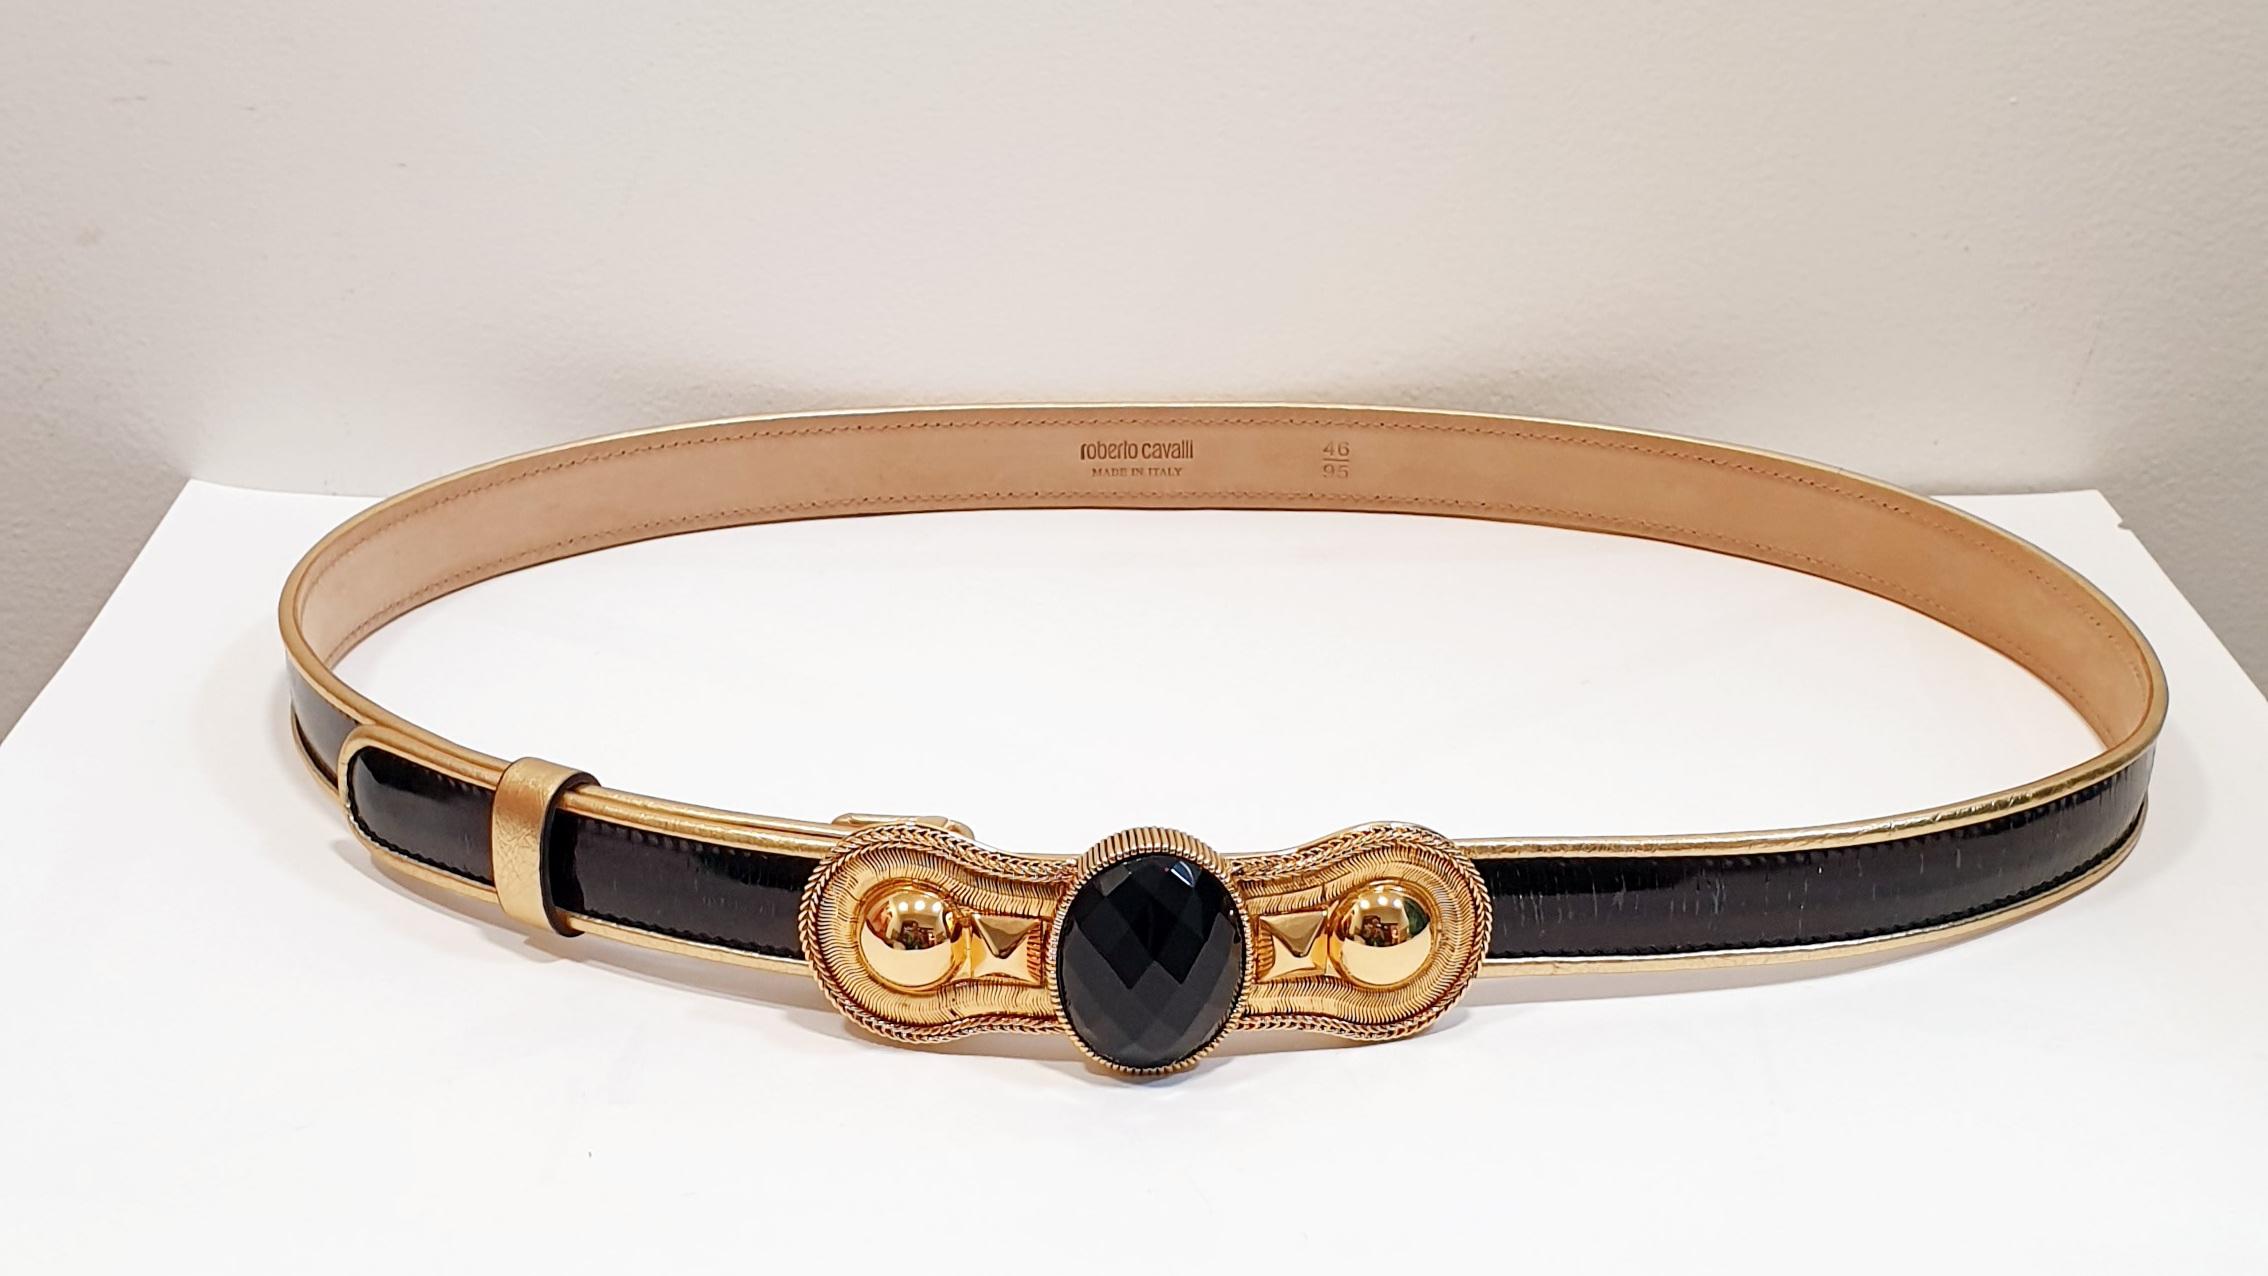 Roberto Cavalli
Black Patent Leather Gold Tone Logo Stone Buckle 46 95 Italy Belt

DETAILS
Color: Black
Measurements:
115 cm  45,27inches L x 2,5cm  0,98 inches W 
Item Name     NWT BEIGE LEATHER GOLD TONE LOGO STONE BUCKLE BELT 42 85 ITALY
Brand: 